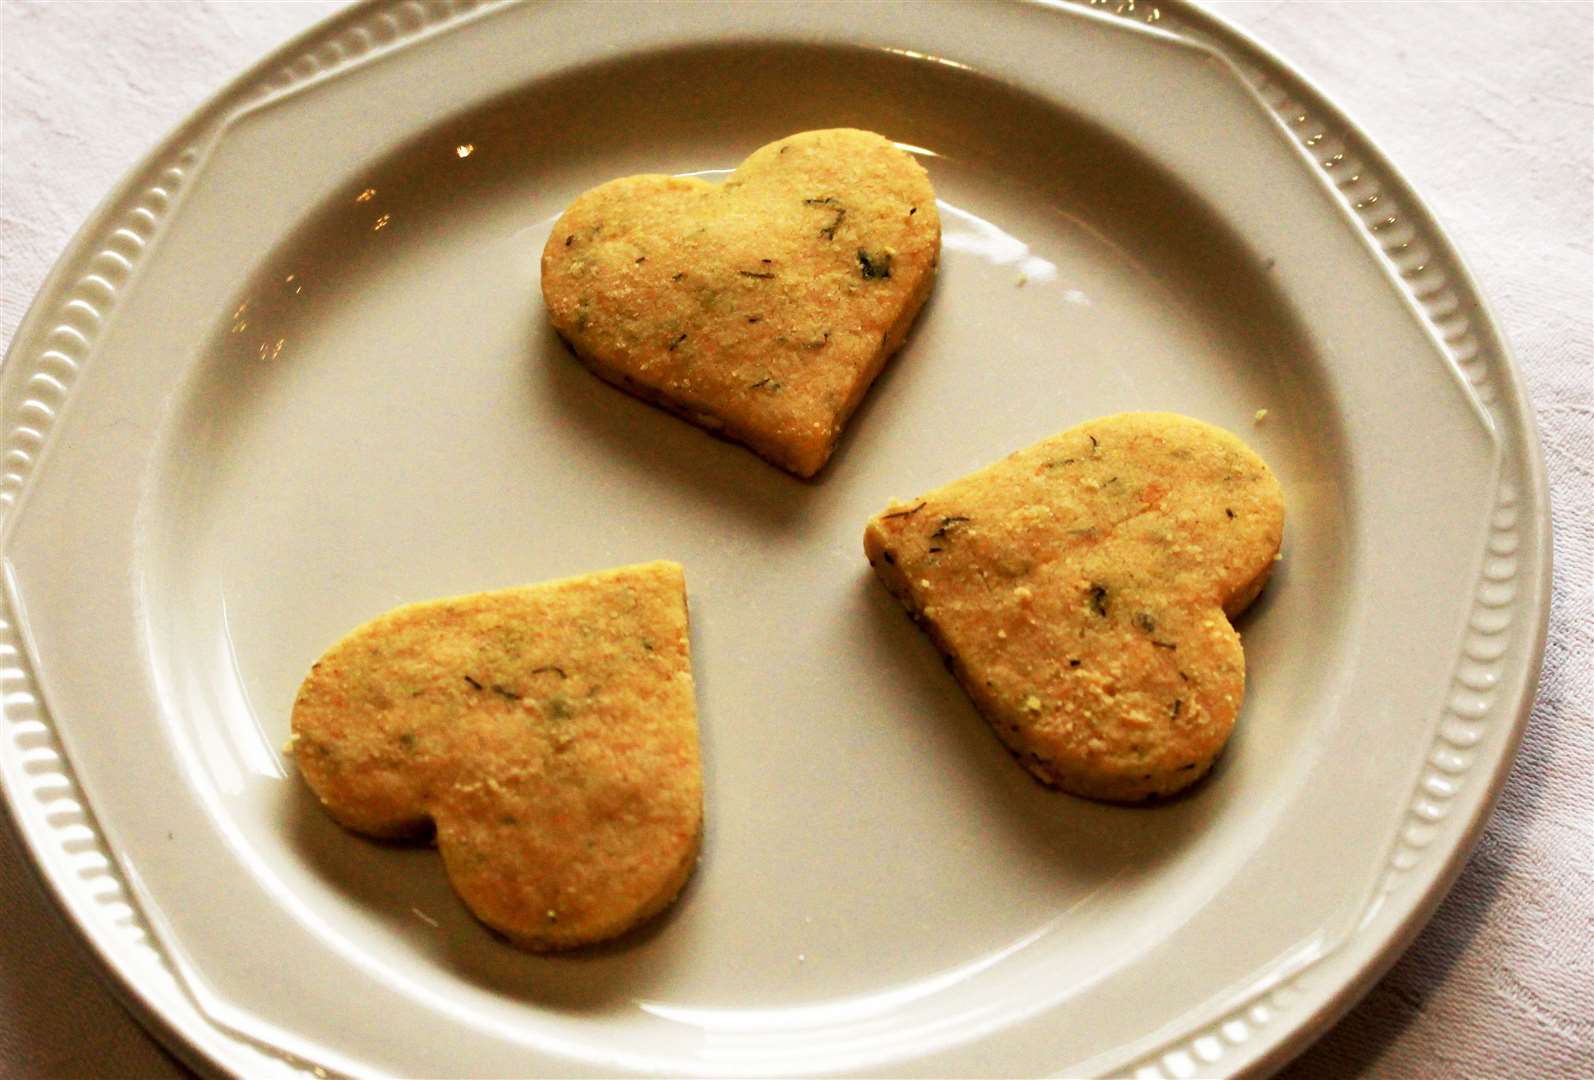 One of the bakers hoped the judges would love these heart-shaped savoury shortbreads.